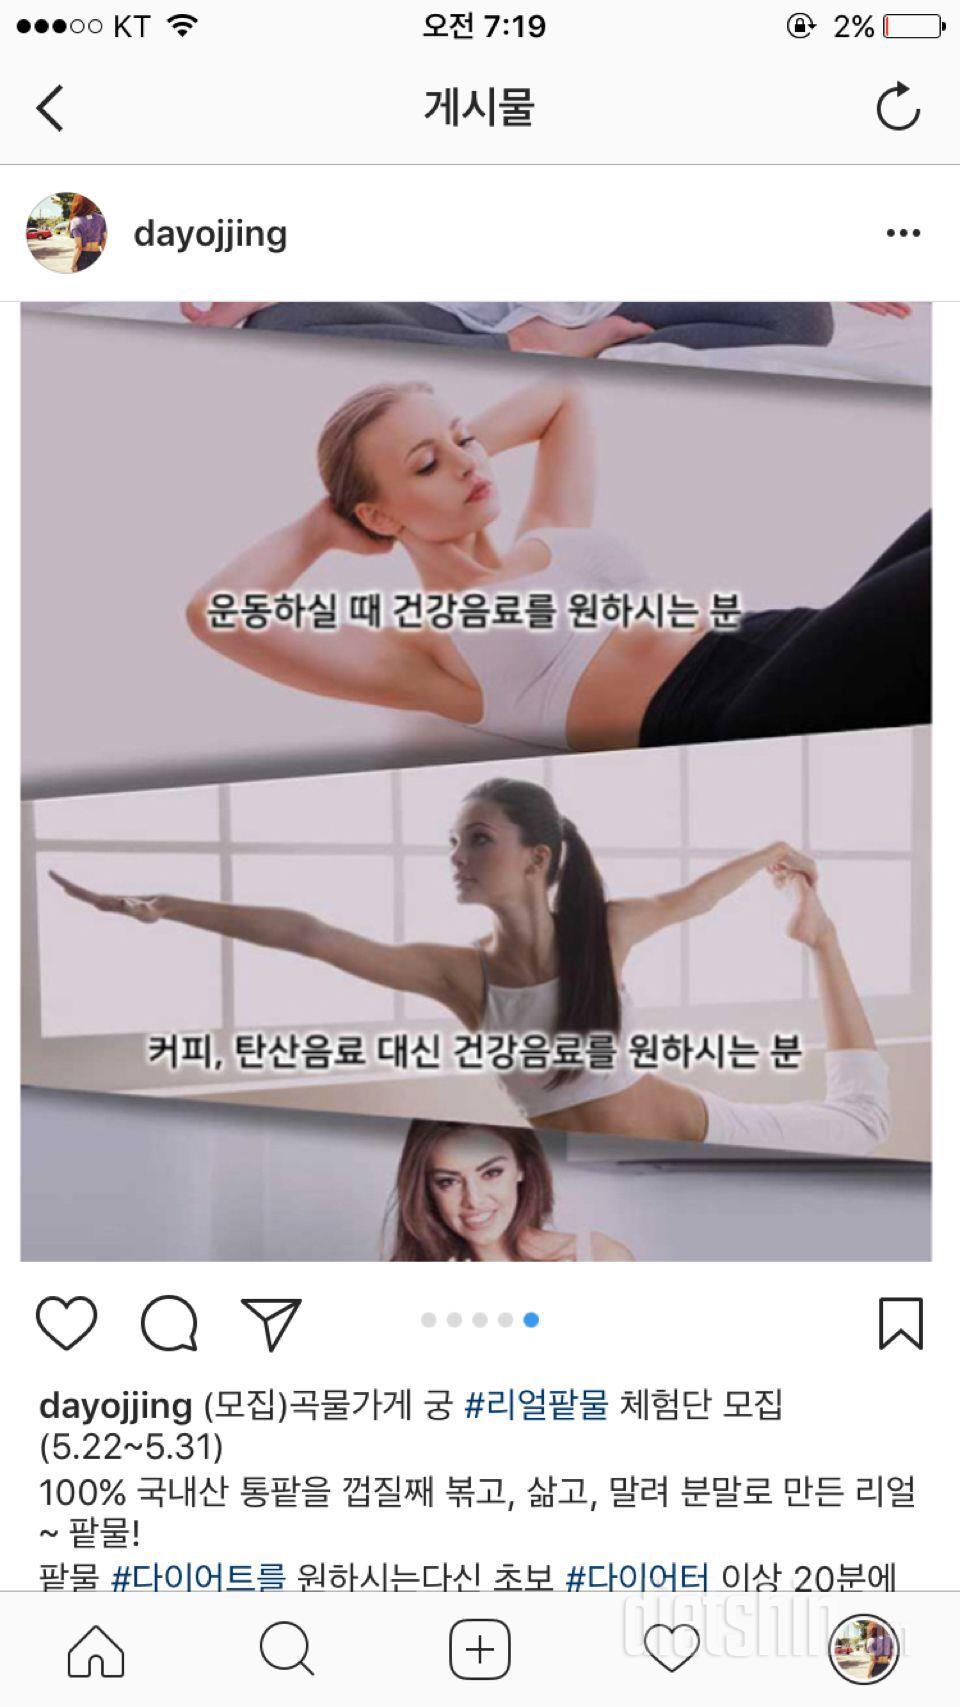 How to Use 궁 리얼팥물 *^_^* (인스타 공유완료!)